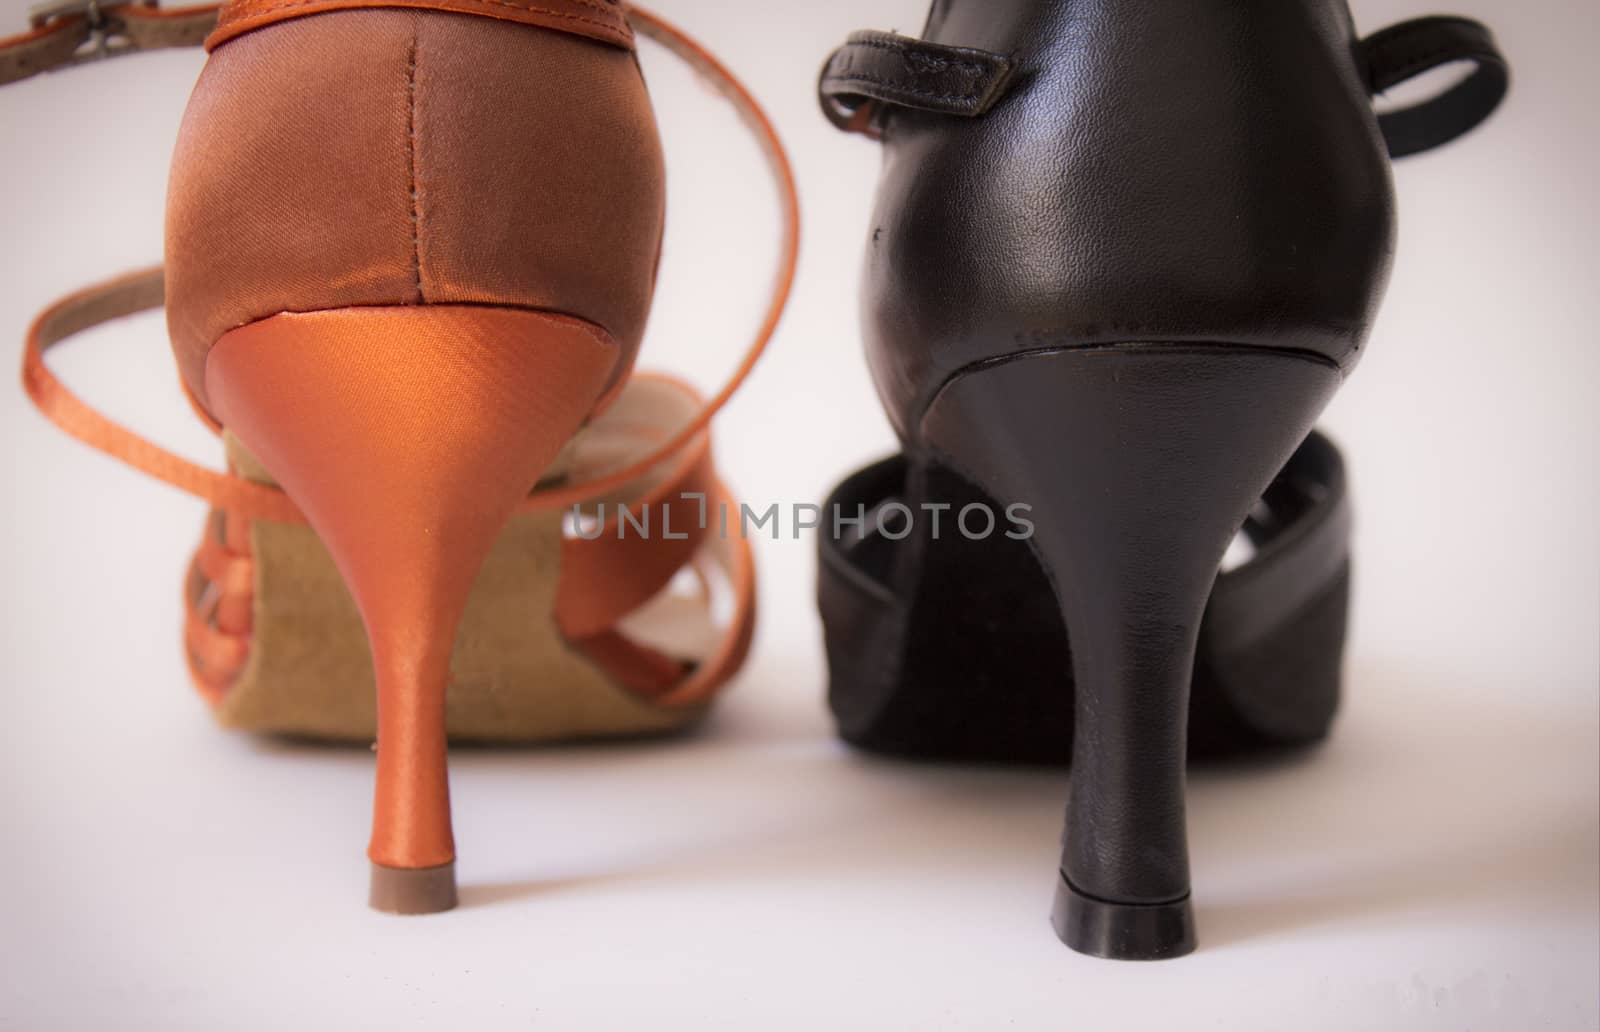 Heeled dancing shoes when viewed from behind. In black and orange.